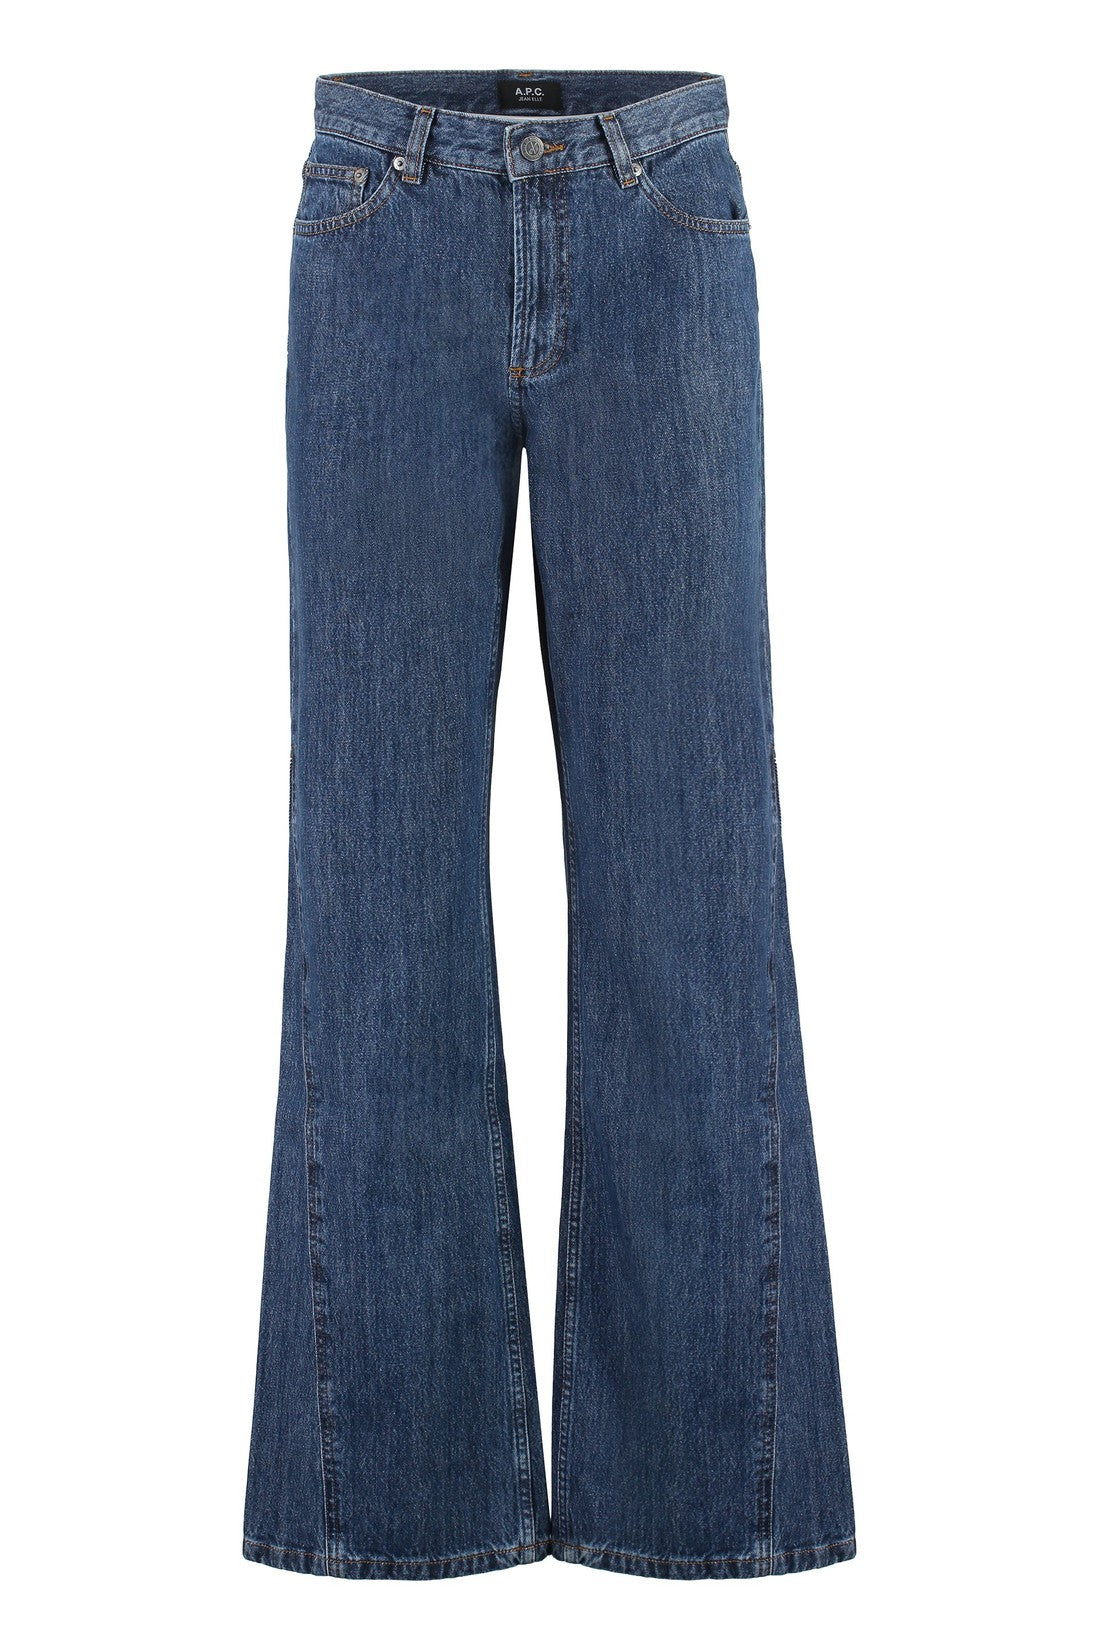 A.P.C.-OUTLET-SALE-High-rise flared jeans-ARCHIVIST